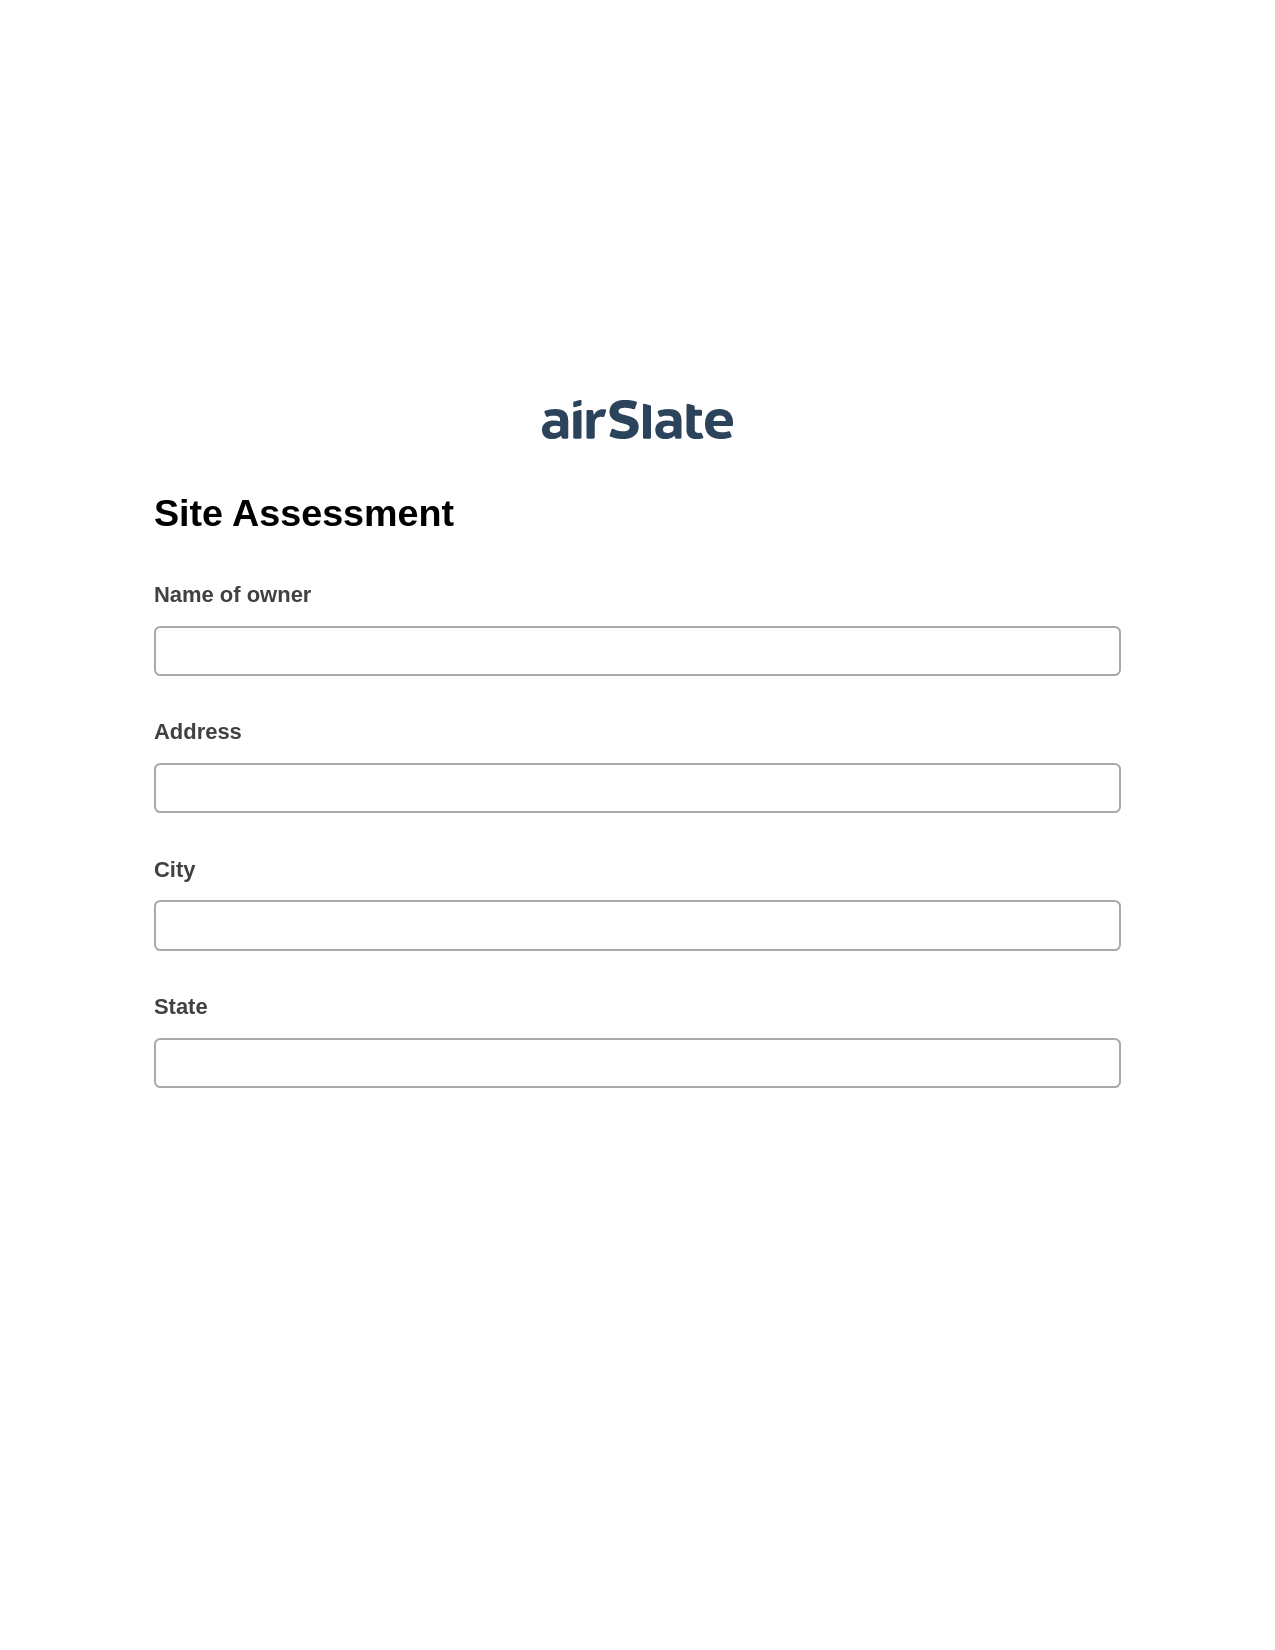 Site Assessment Pre-fill from Salesforce Record Bot, Document Hide Bot, Export to Google Sheet Bot